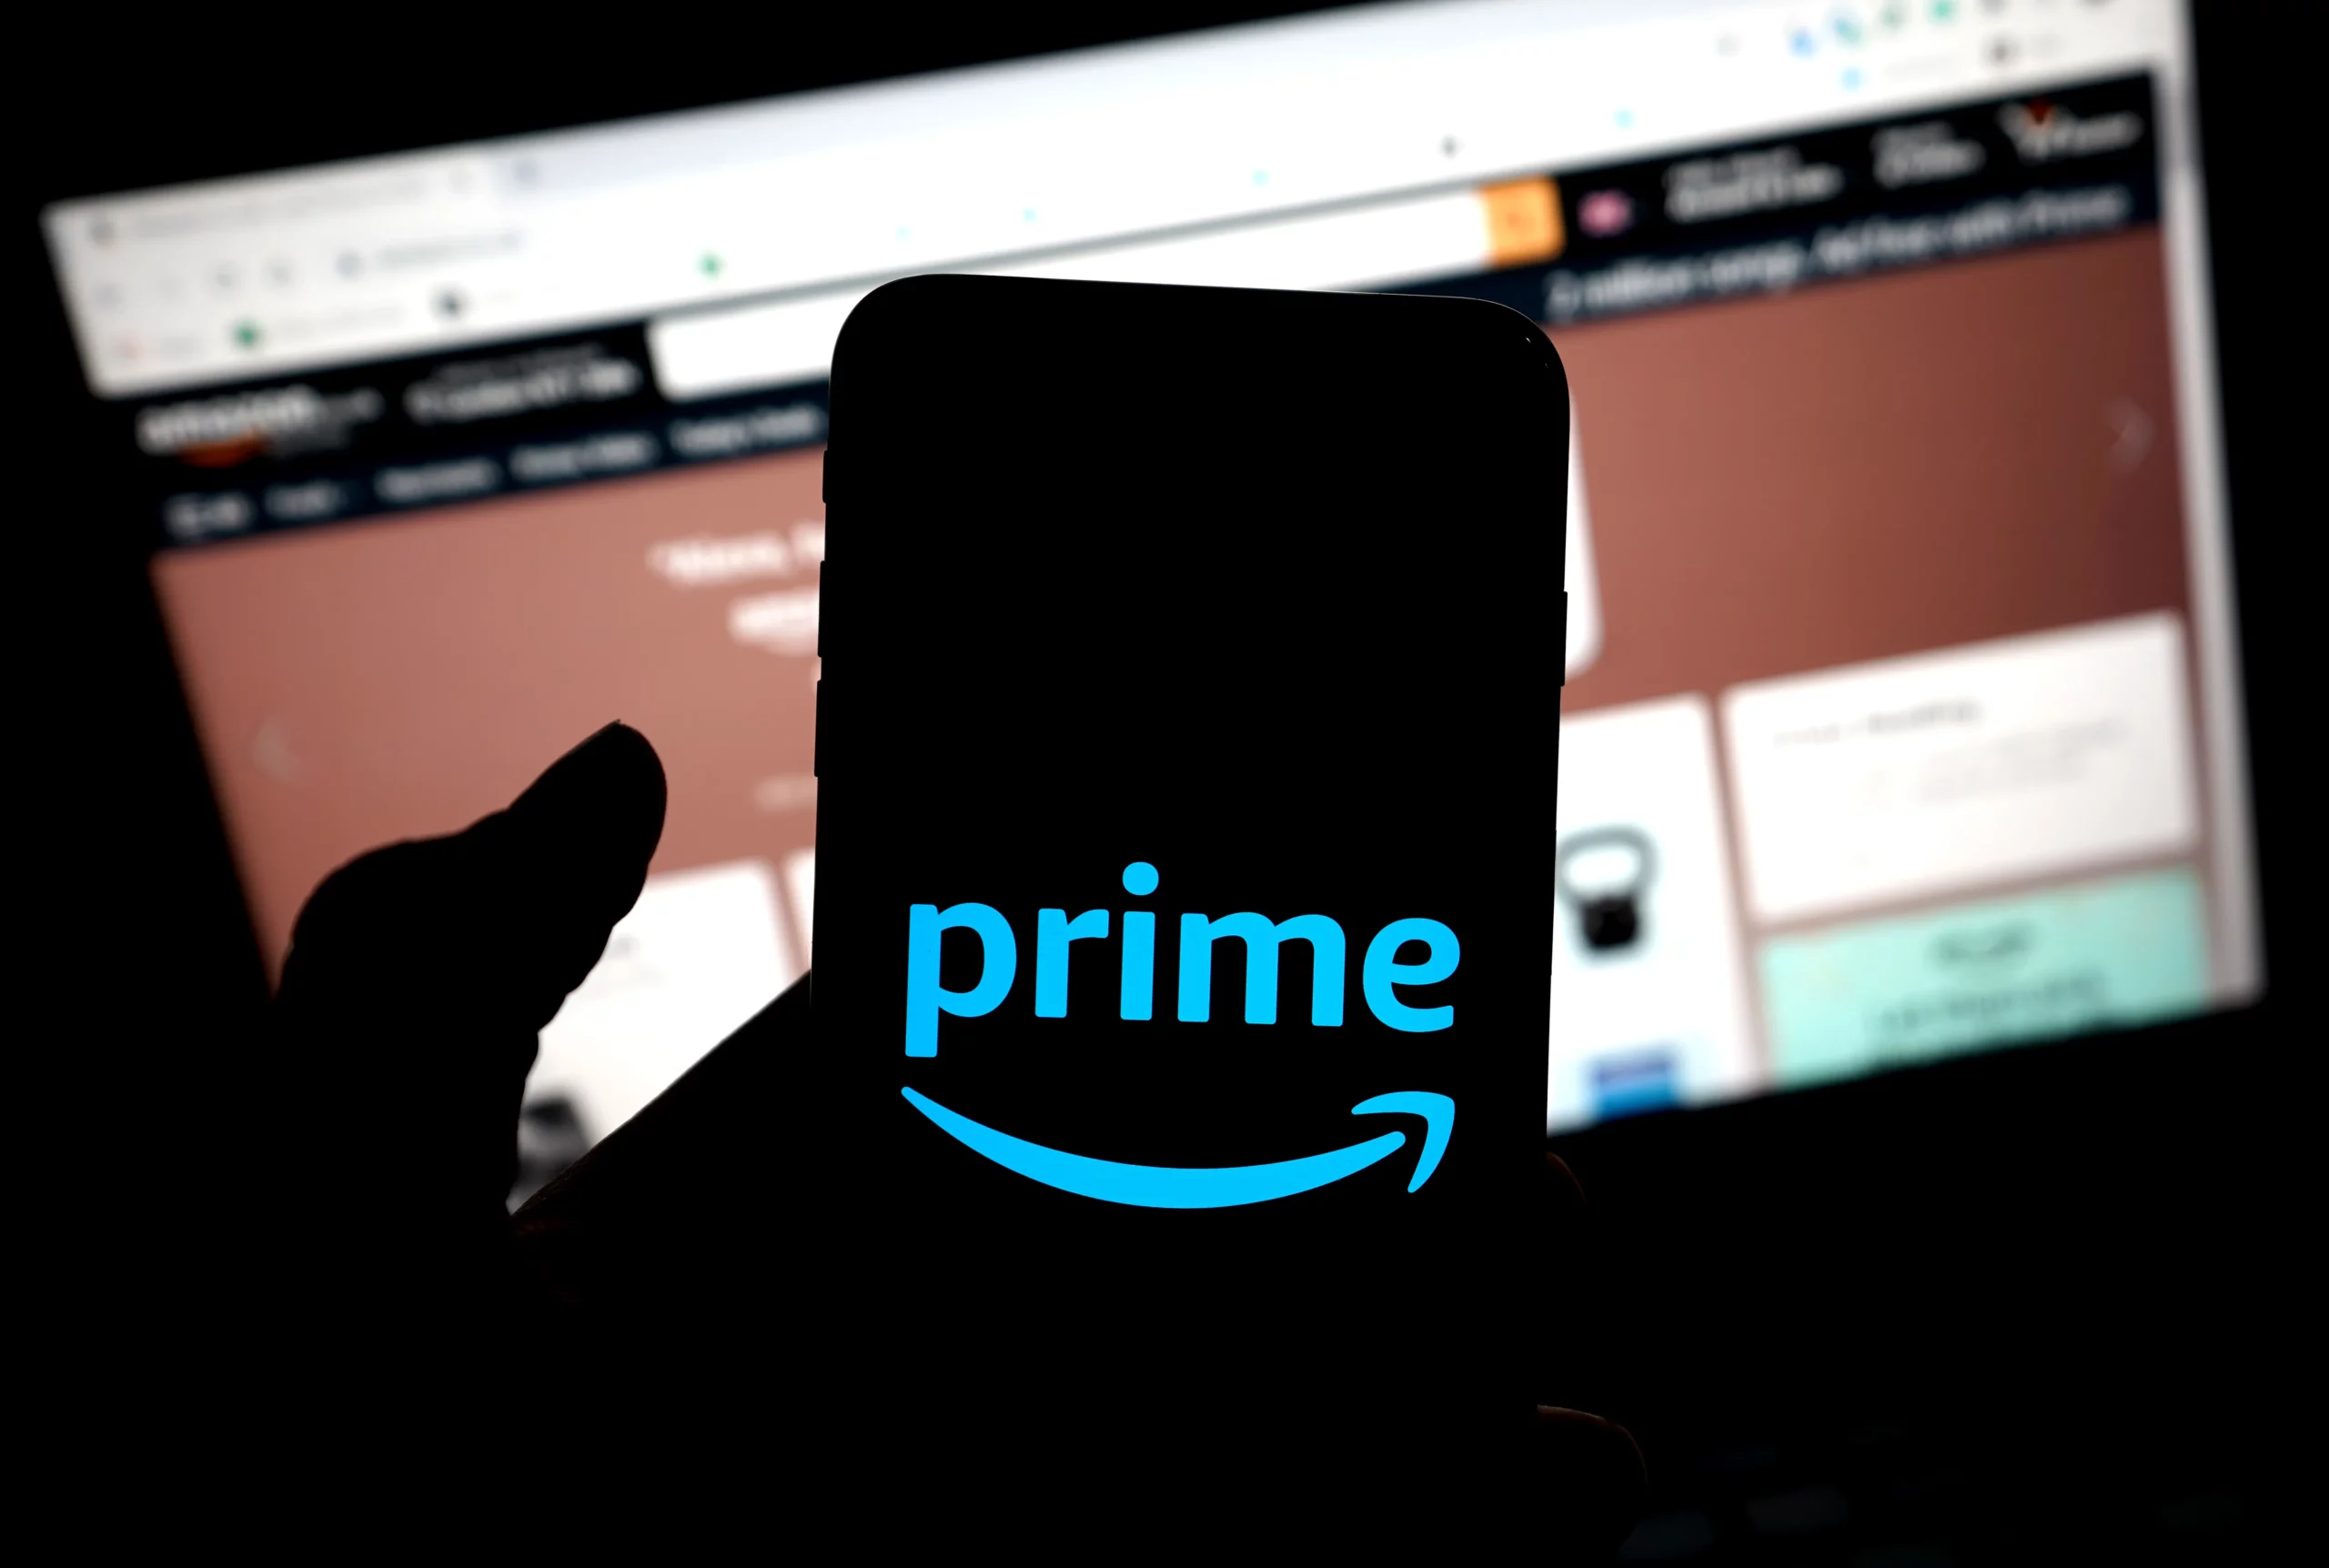 FTC Sue Amazon For Making It Almost Impossible To Cancel Prime Subscription